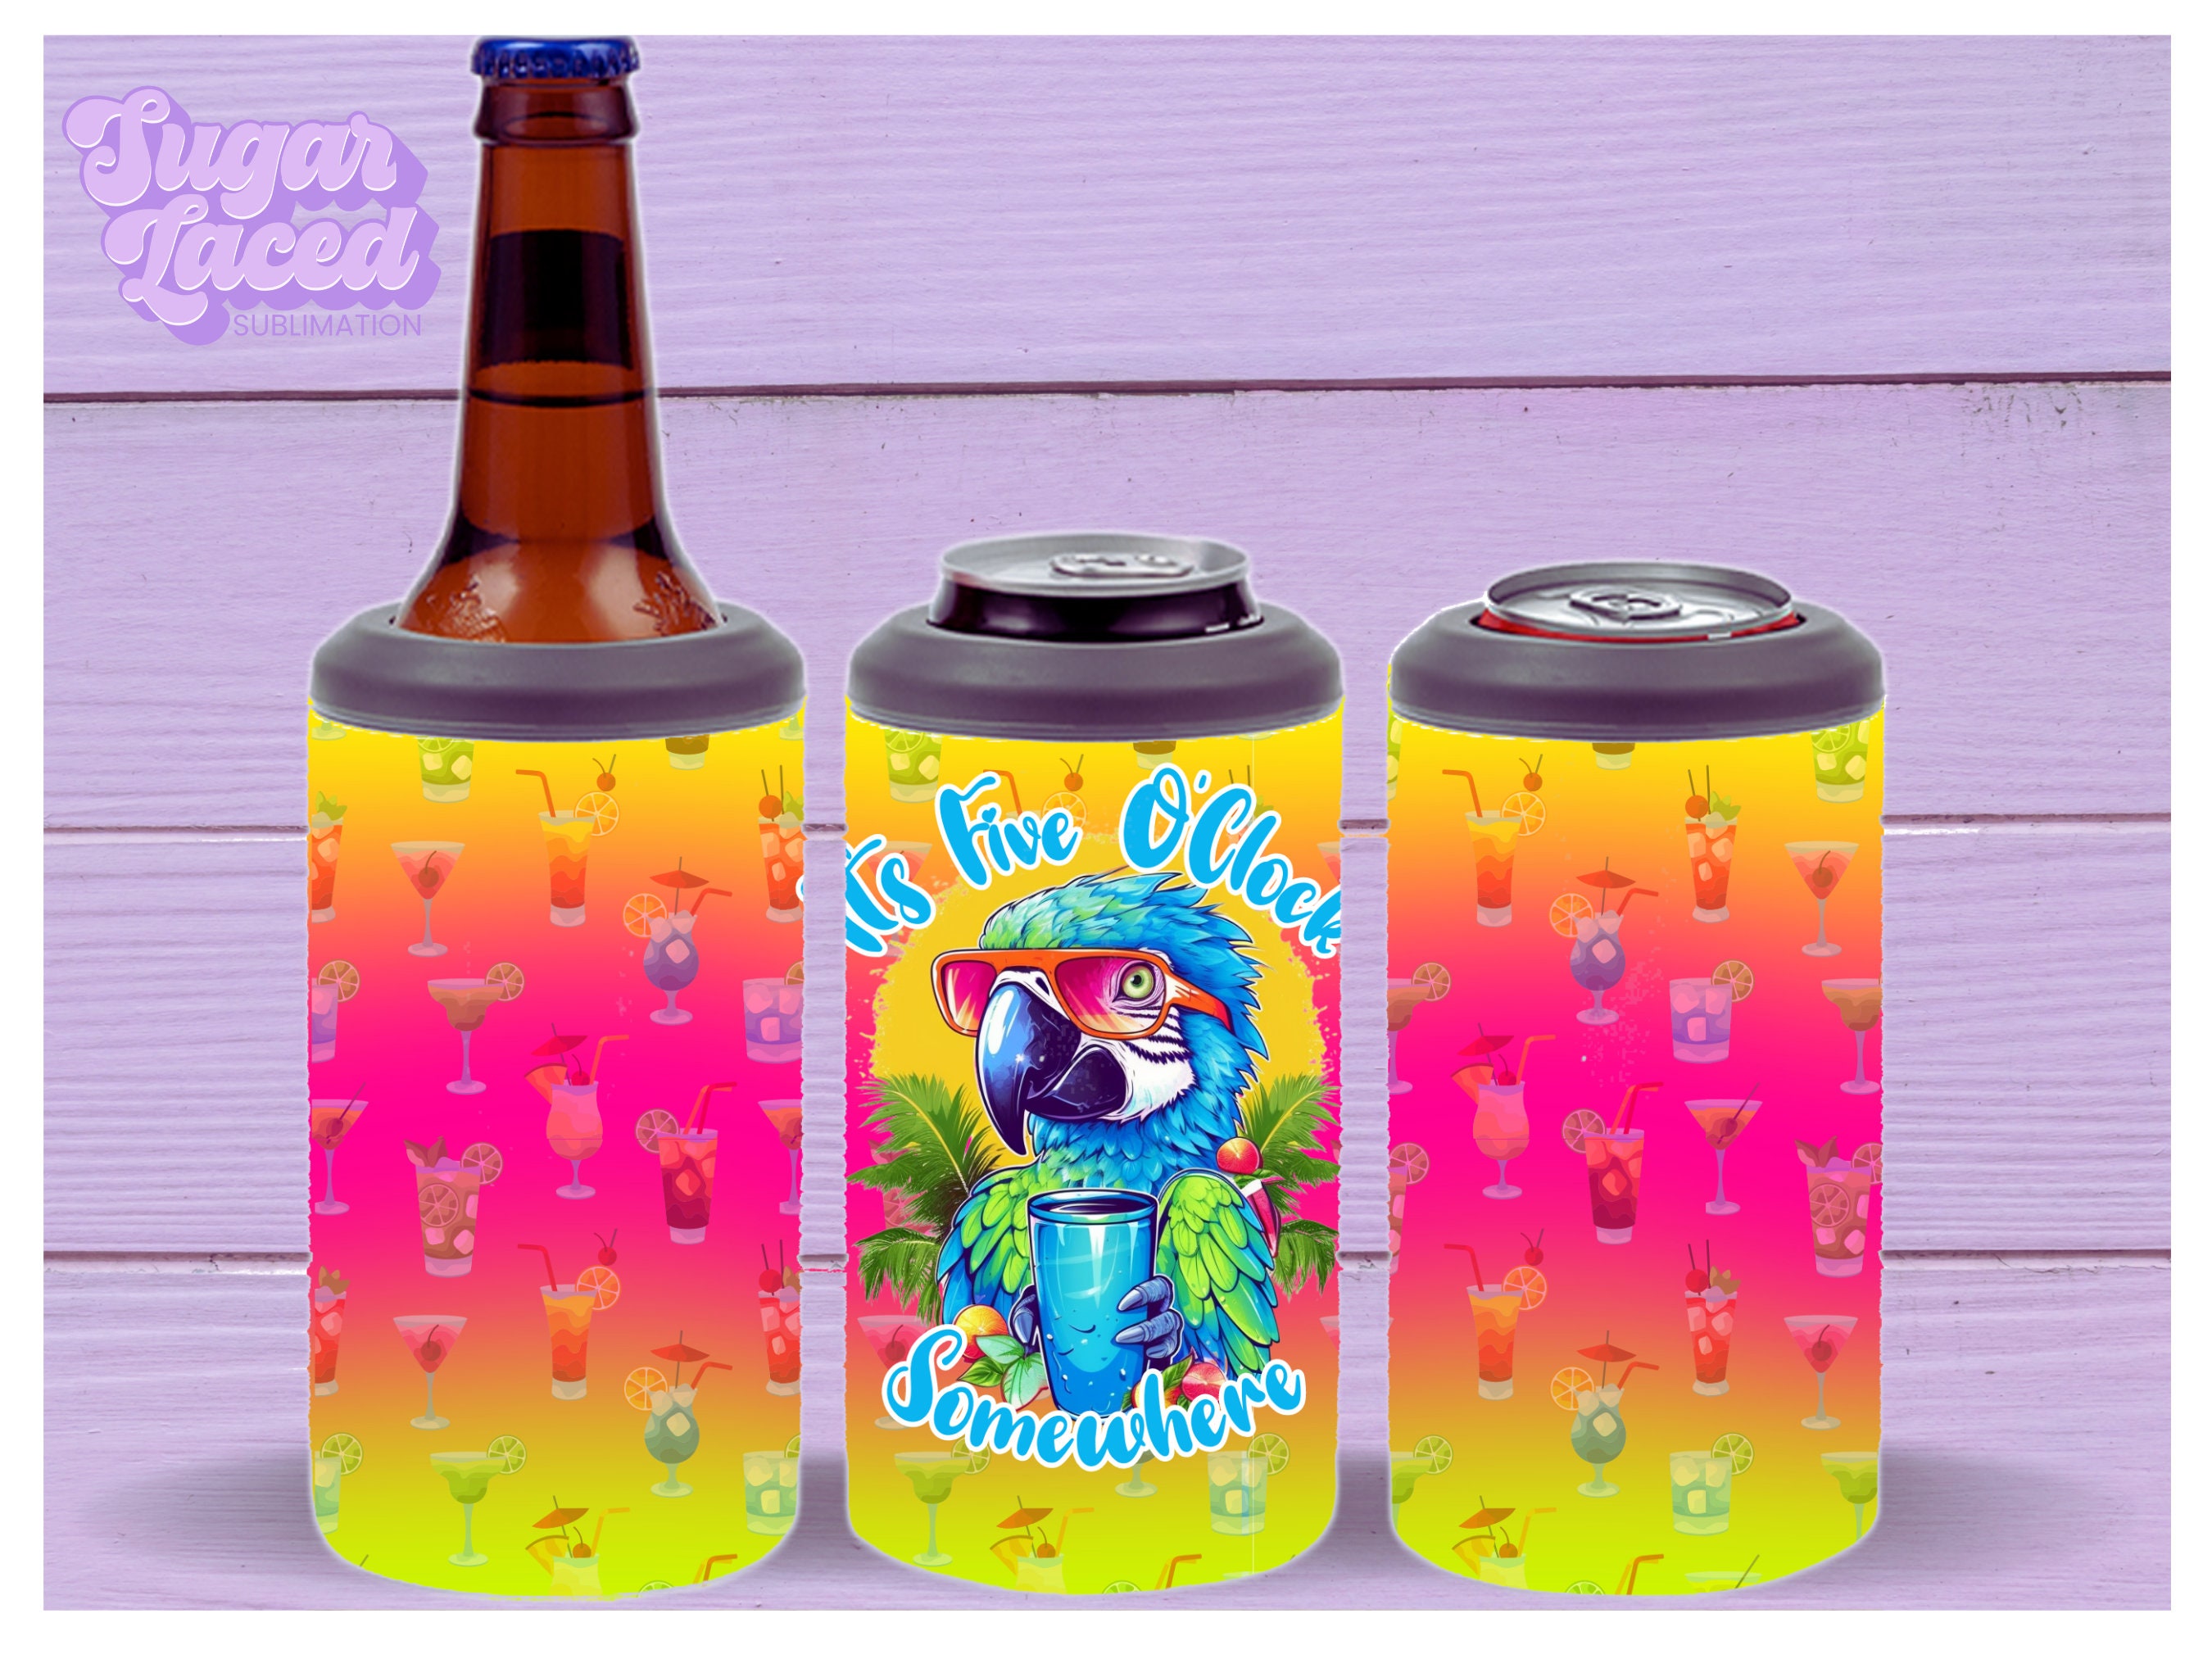 Full Wrap Engraved Frost Buddy Universal Can Cooler, Highlander Cow Print,  Cactus, Star, Western Decor, Bachelorette Gifts, Can Cooler 